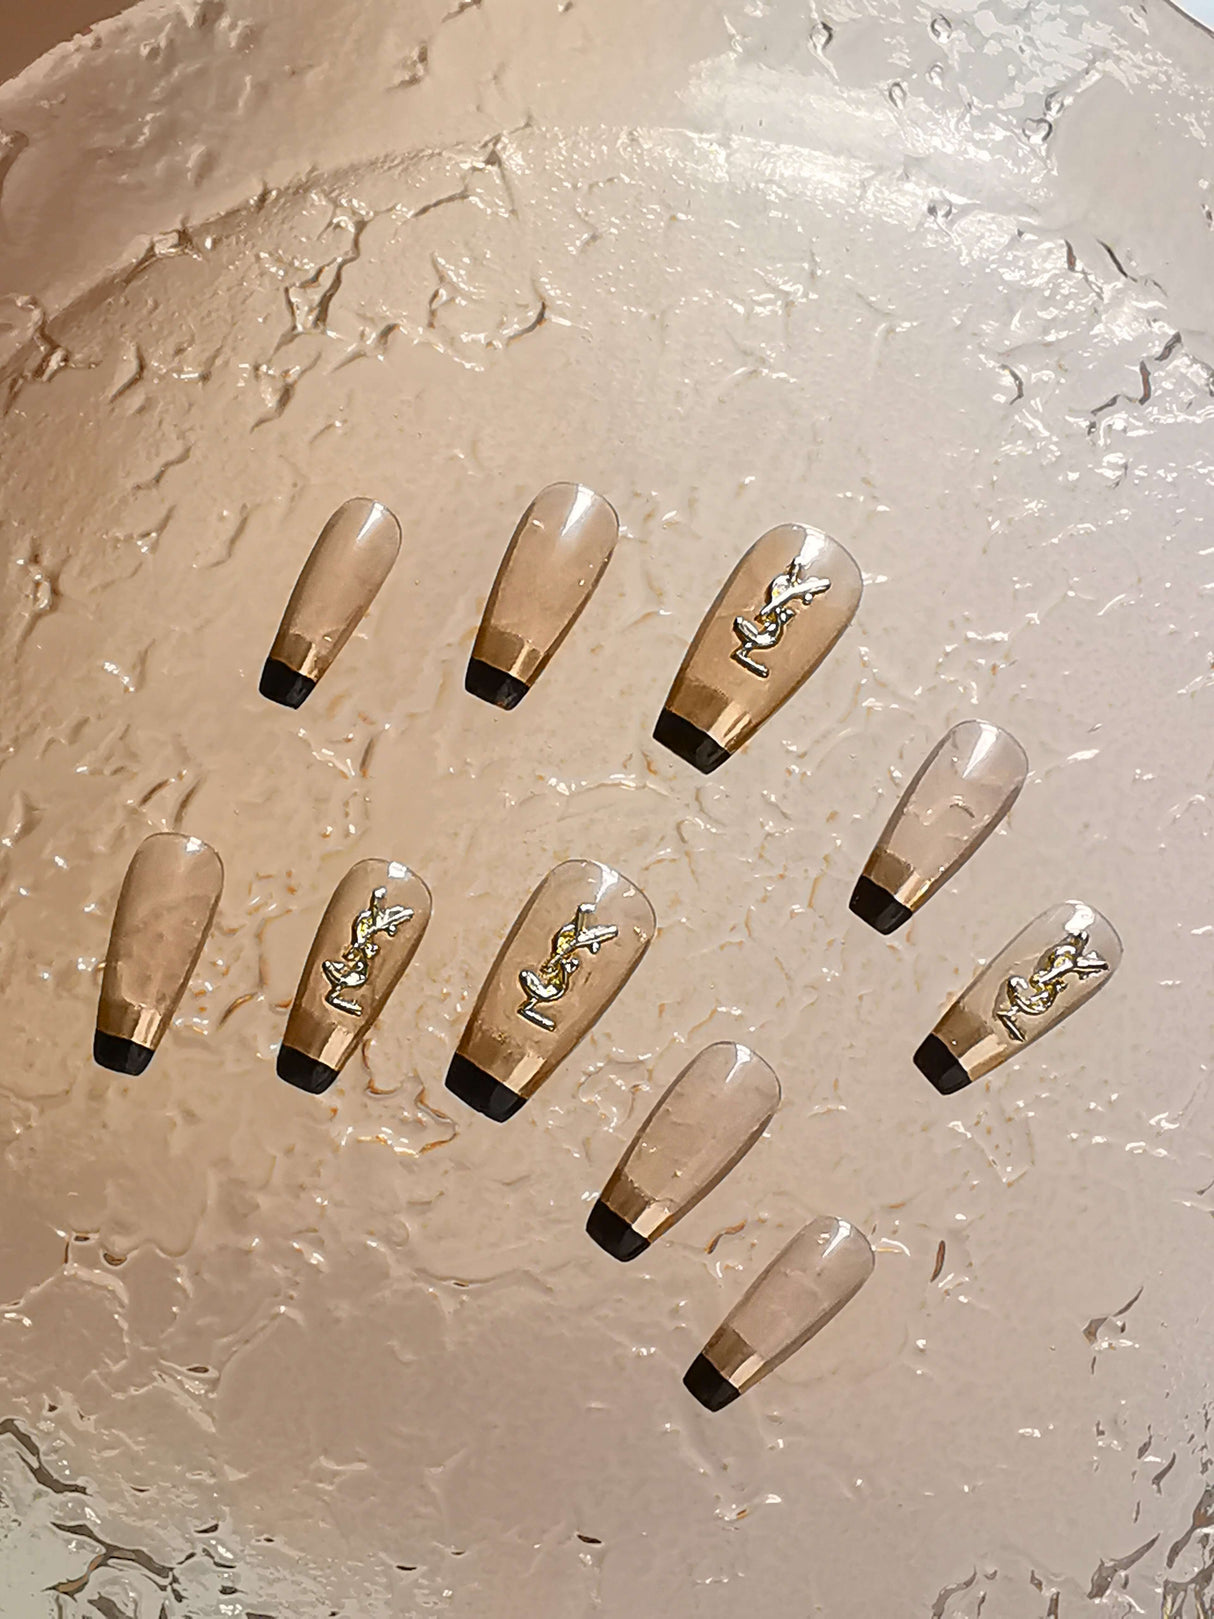 These press-on nails are perfect for special occasions or professional projects, featuring a French manicure style with black tips and trendy gold patterns for an elegant and luxurious look.